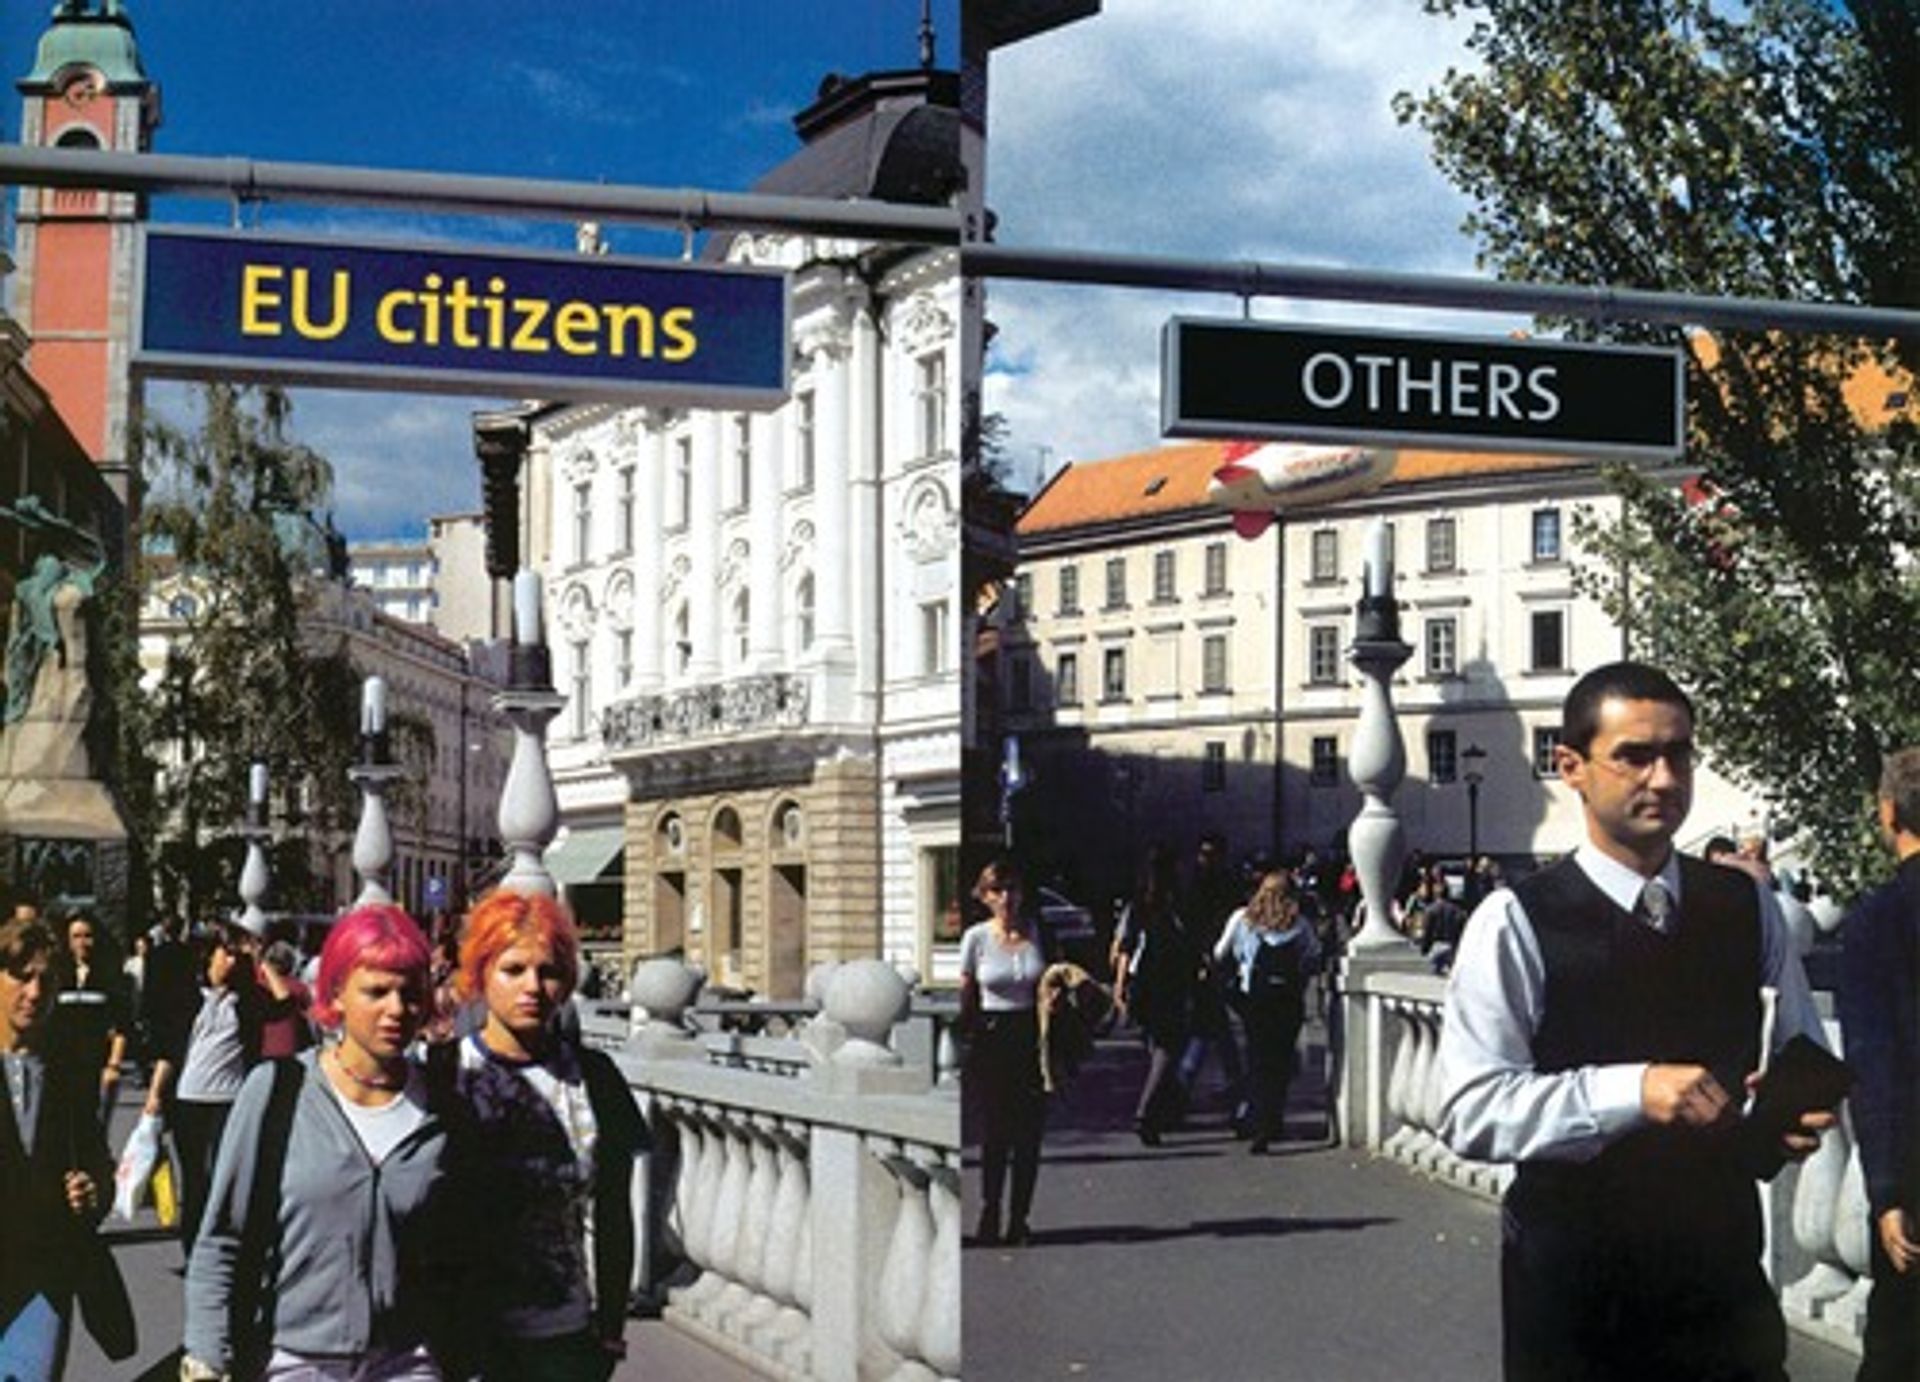 Šelja Kameric’s signs EU/Others (2000) will be displayed at the entrance of the exhibition (Image: courtesy of Šejla Kameric and Galerie Tanja Wagner, Berlin)